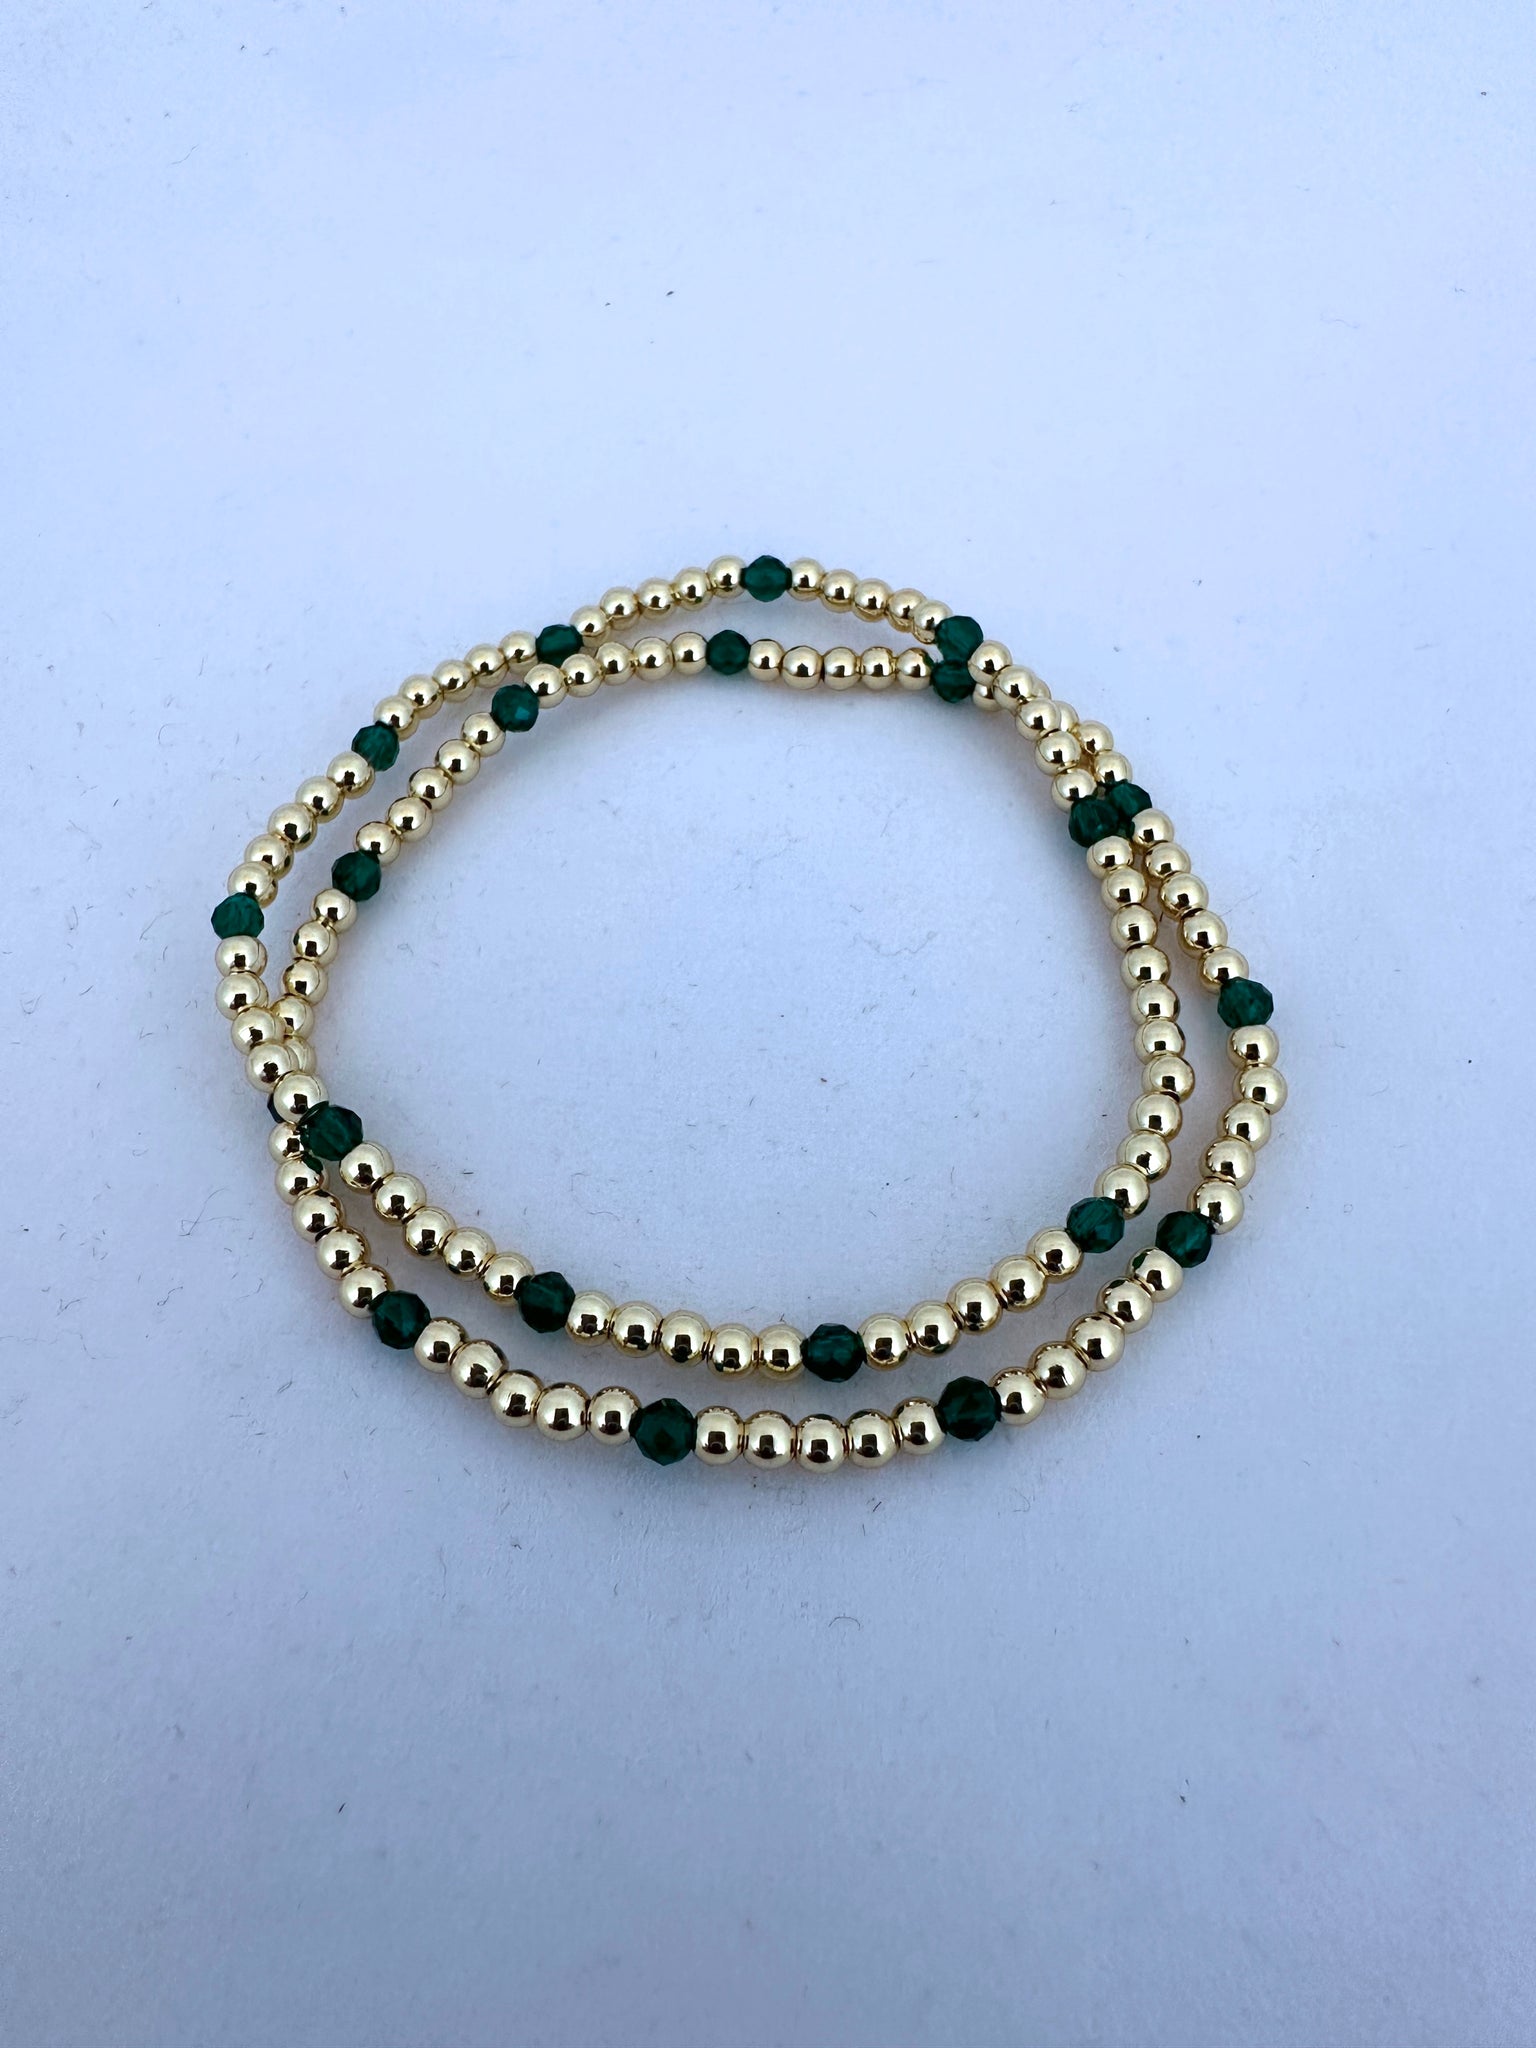 3mm Gold Ball with Scattered Colored Beads